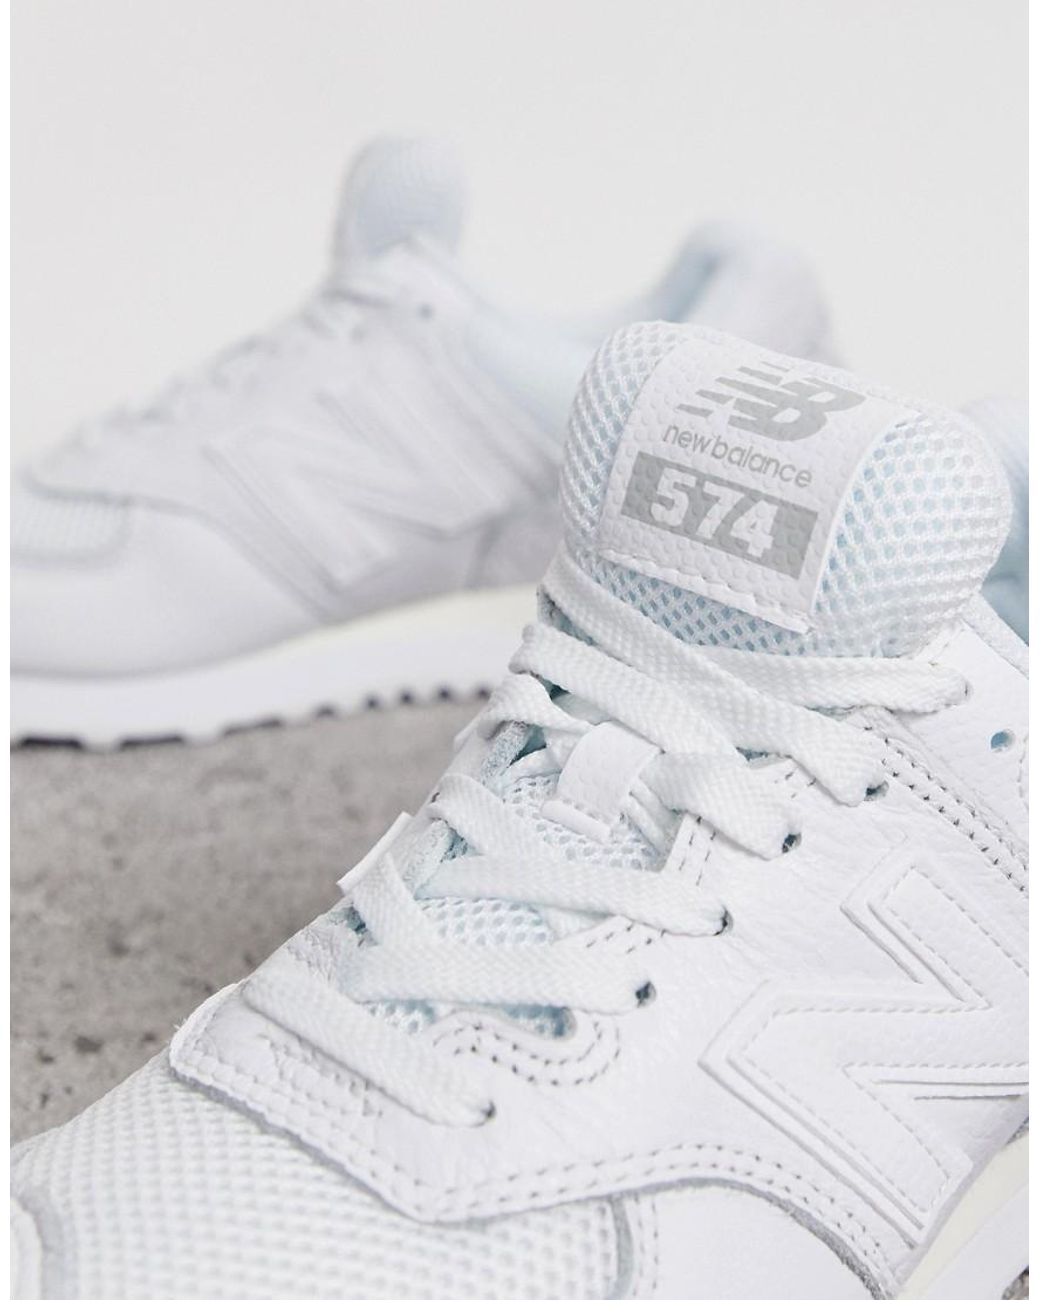 New Balance 574 Triple White Trainers | Lyst